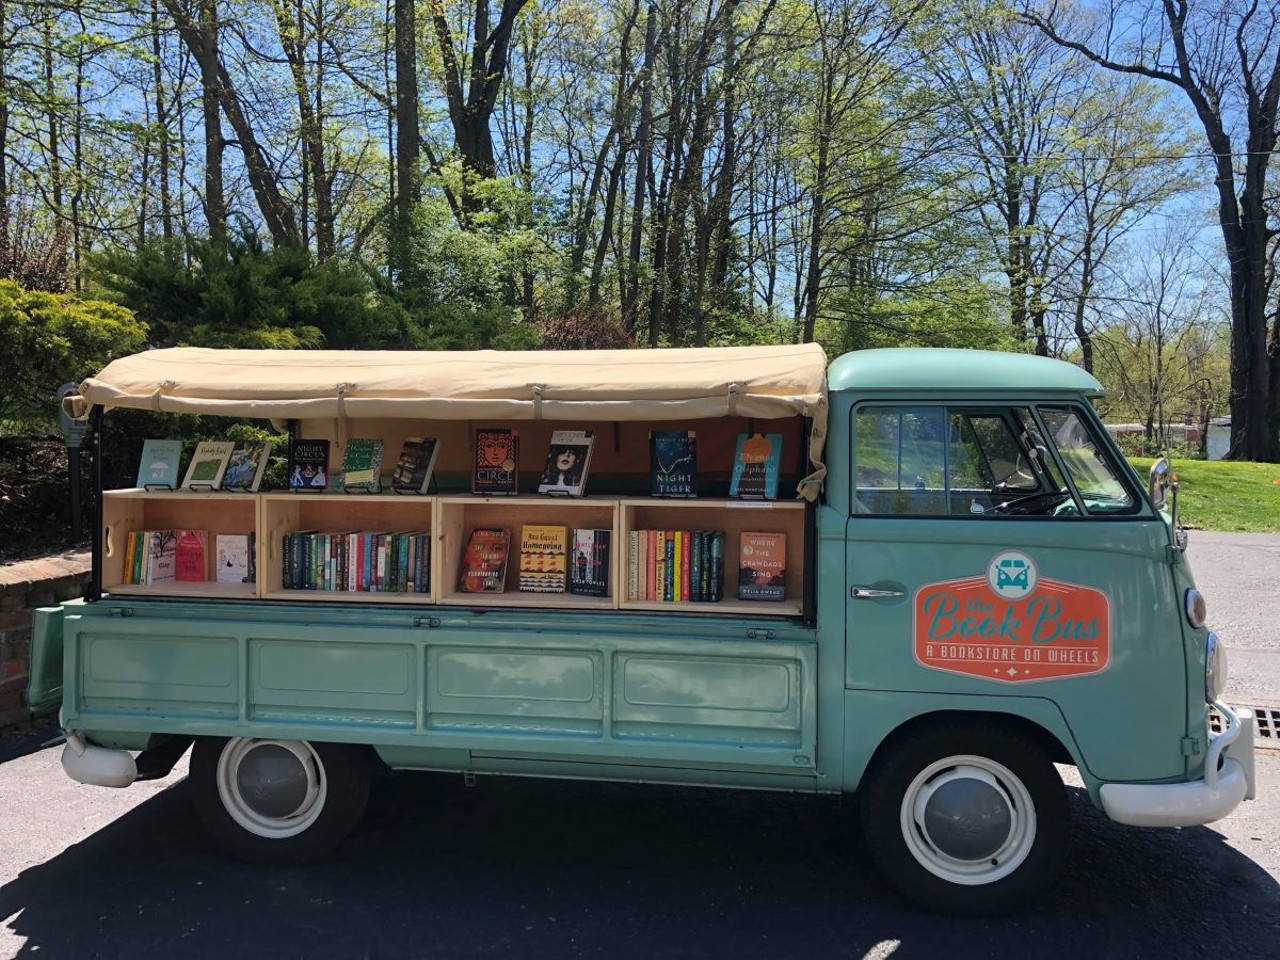 Cincy Book Bus Birthday
When: Nov. 11 from 10 a.m.-4 p.m.
Where: The Book Bus, Sharonville
What: A birthday bash for the Book Bus.        
Who: Cincy Book Bus
Why: Books on wheels.